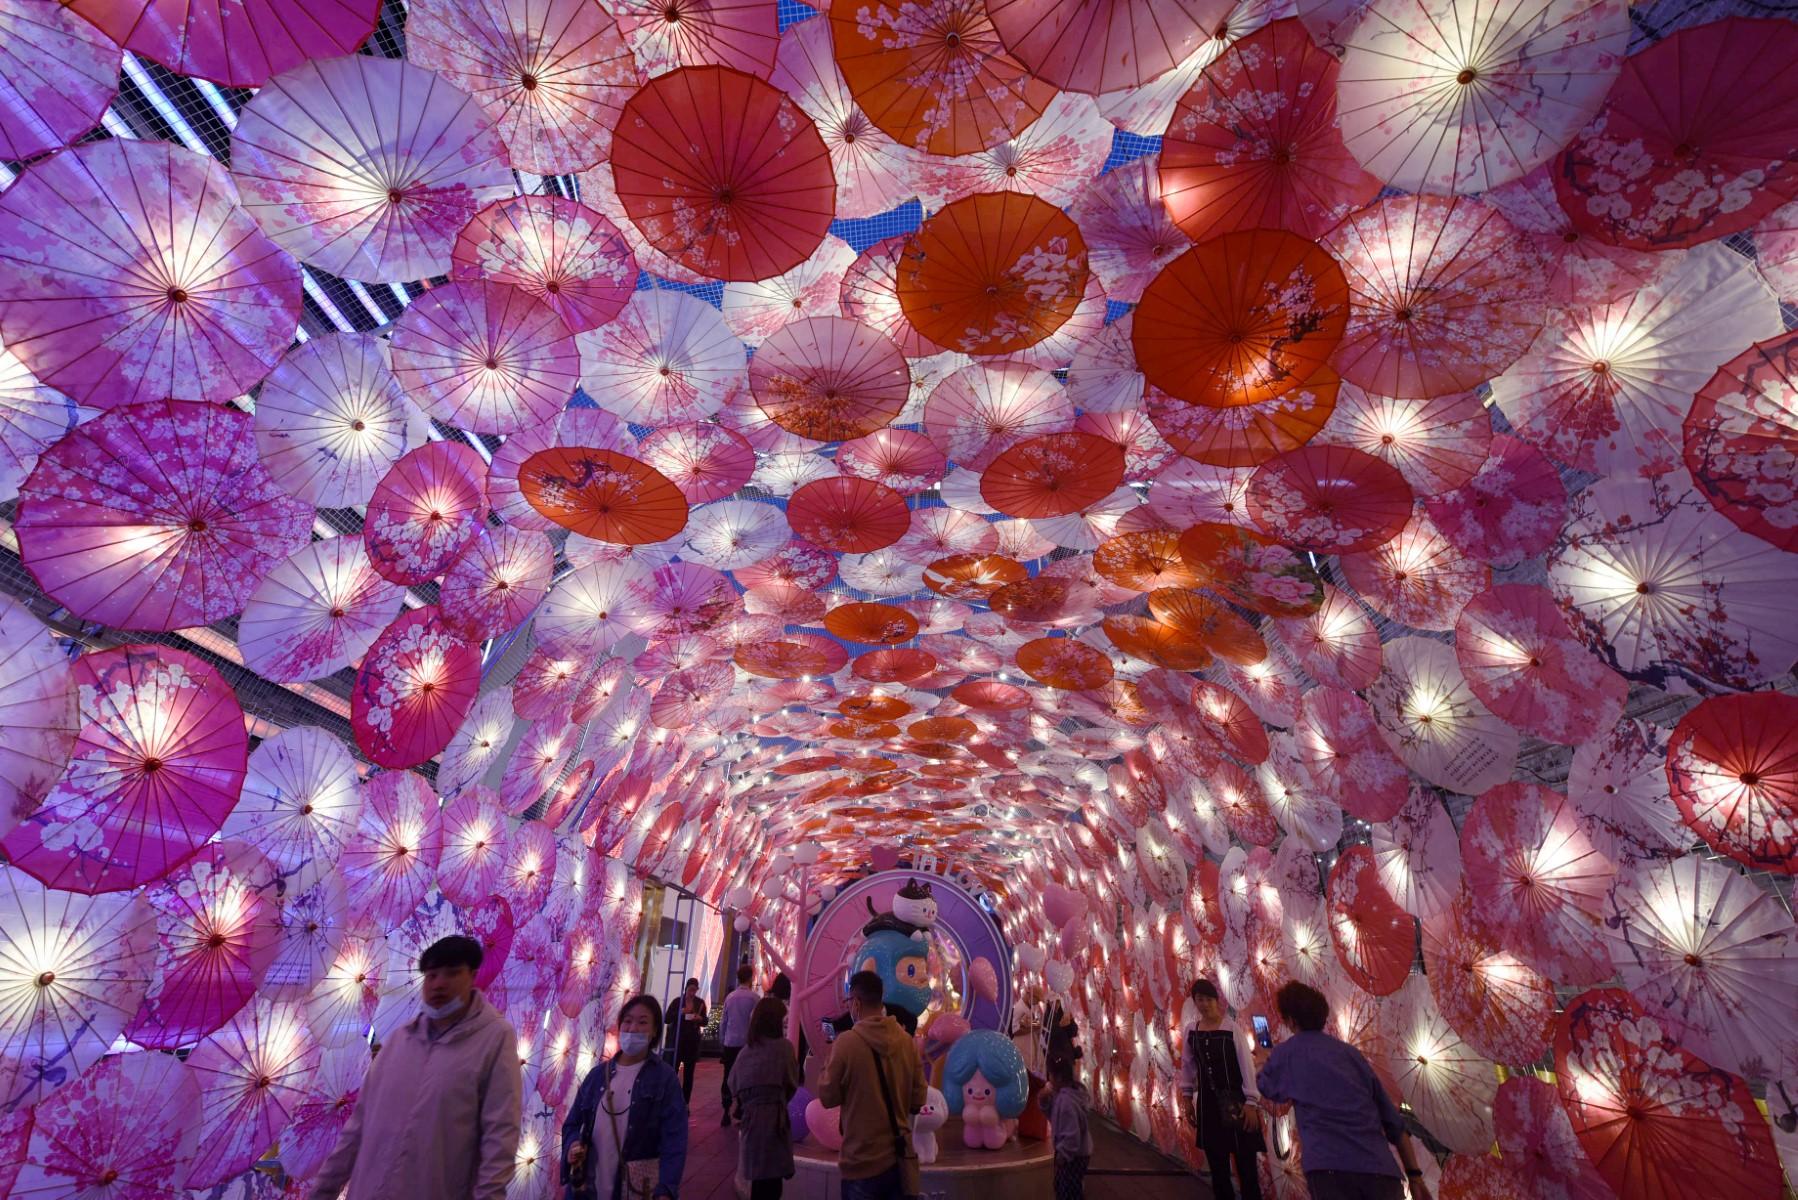 This photo taken on Feb 22, 2021 shows people walking past a display of umbrellas decorated with lights for the upcoming Lantern Festival on a commercial street in Hangzhou, in eastern China's Zhejiang province. Photo: AFP